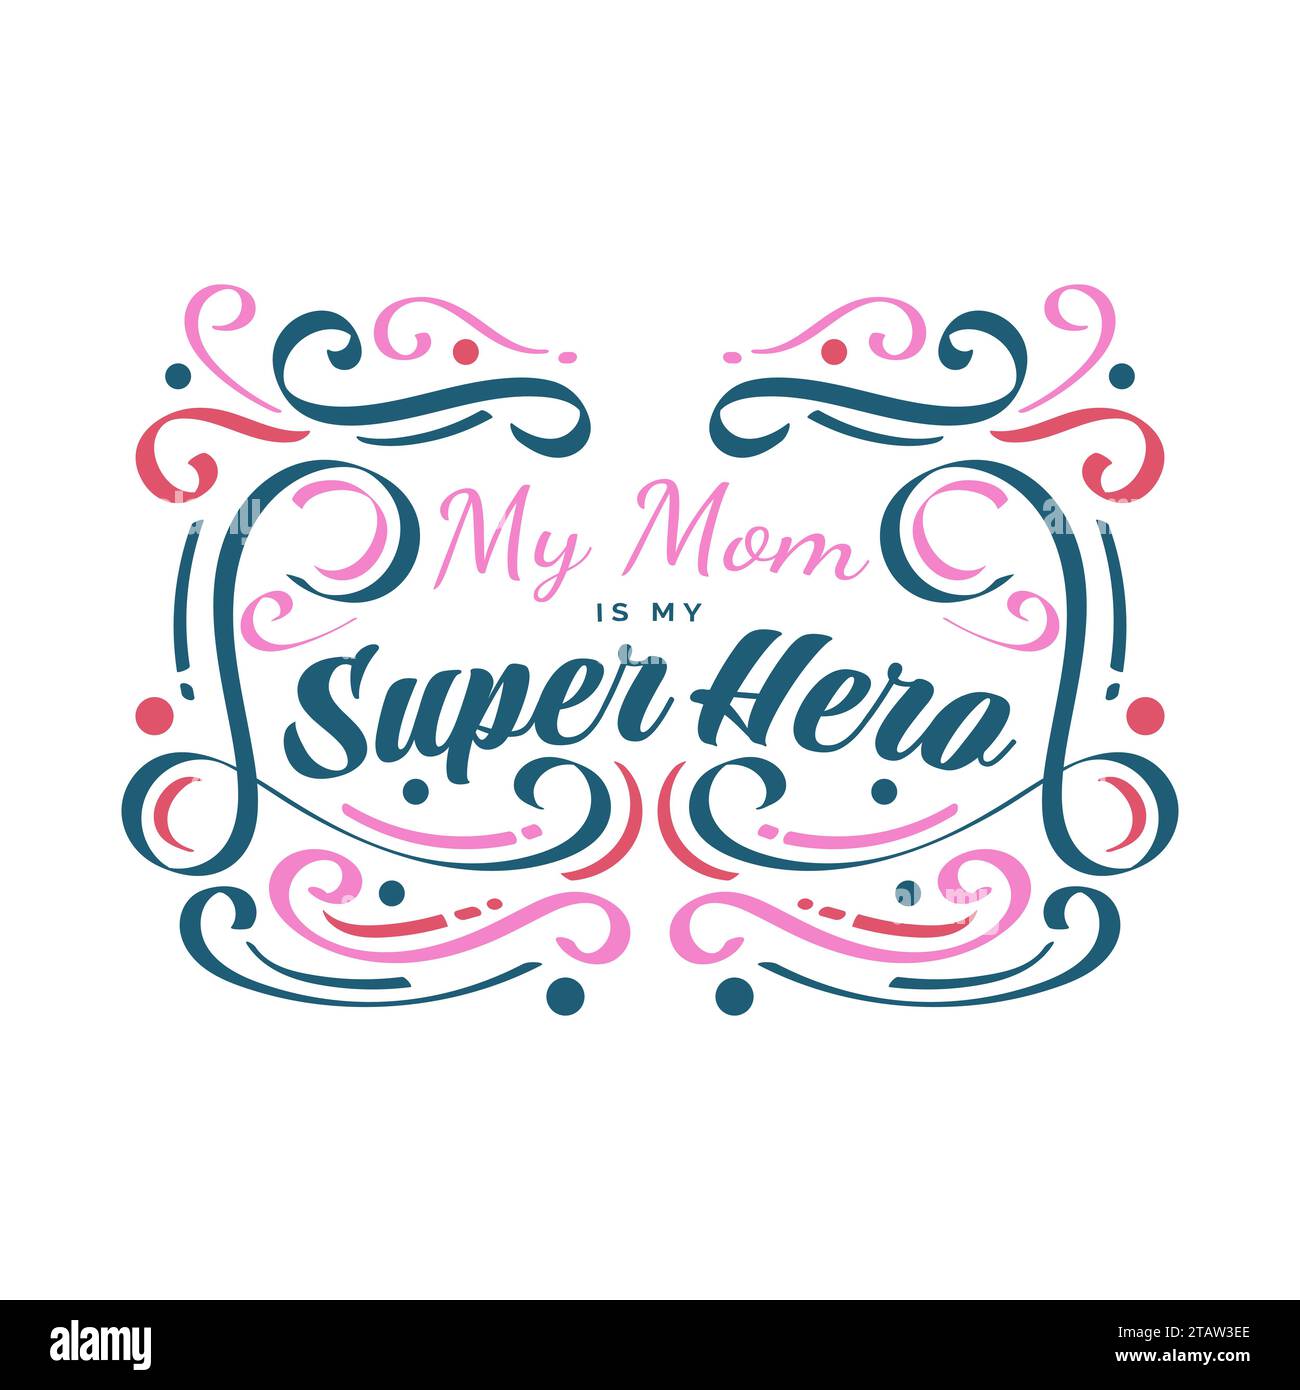 My Mom is My Super Hero Lettering. Mother's Day Typography Design with Colorful Doodle Style. Can be Used for Greeting Card, Poster, Banner, or T Shir Stock Vector